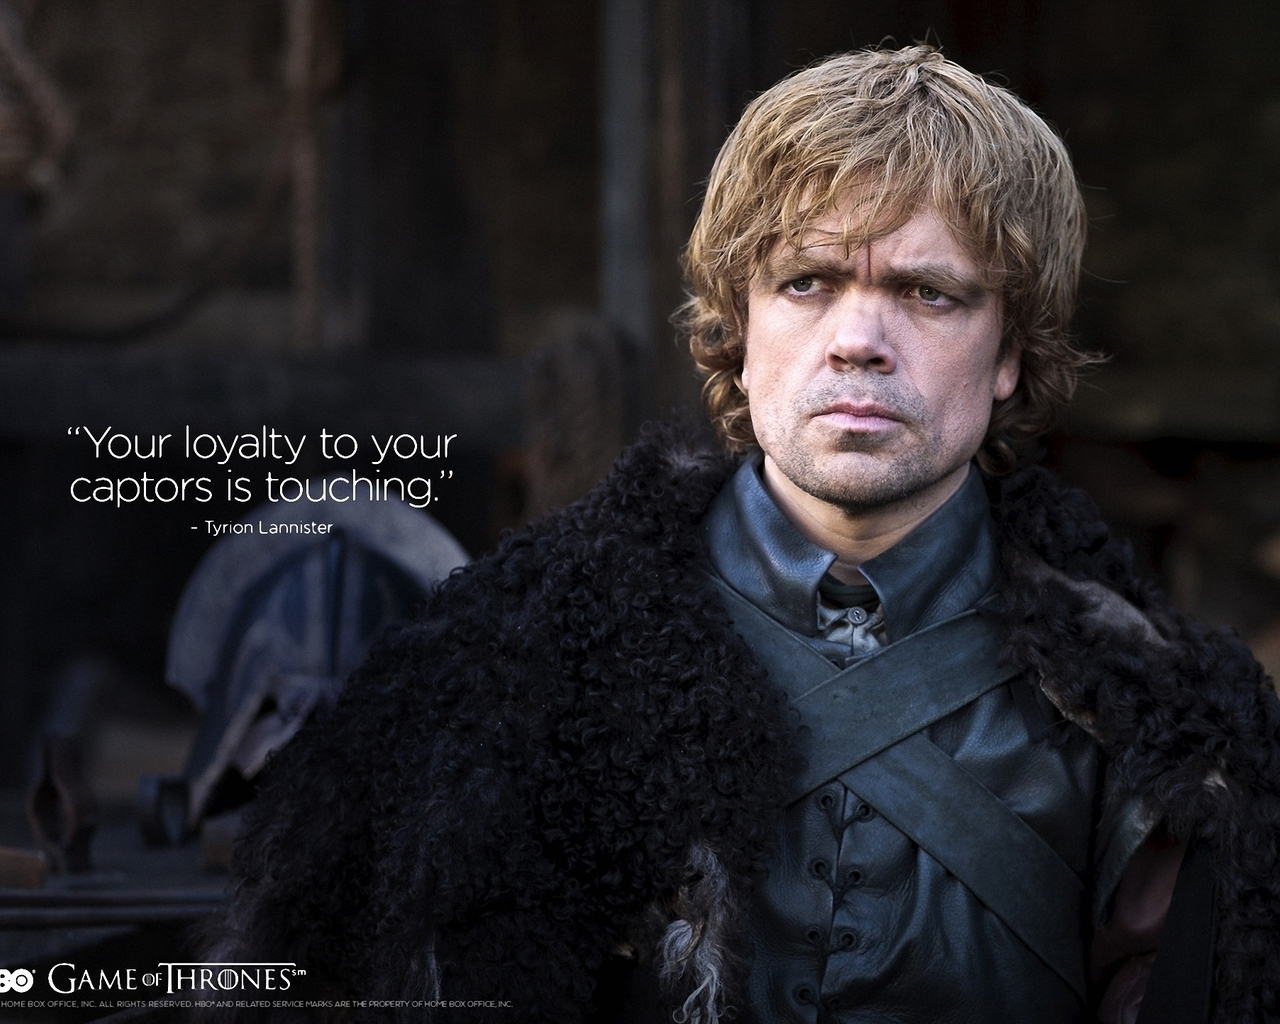 Tyrion Lannister Quote Game of Thrones for 1280 x 1024 resolution